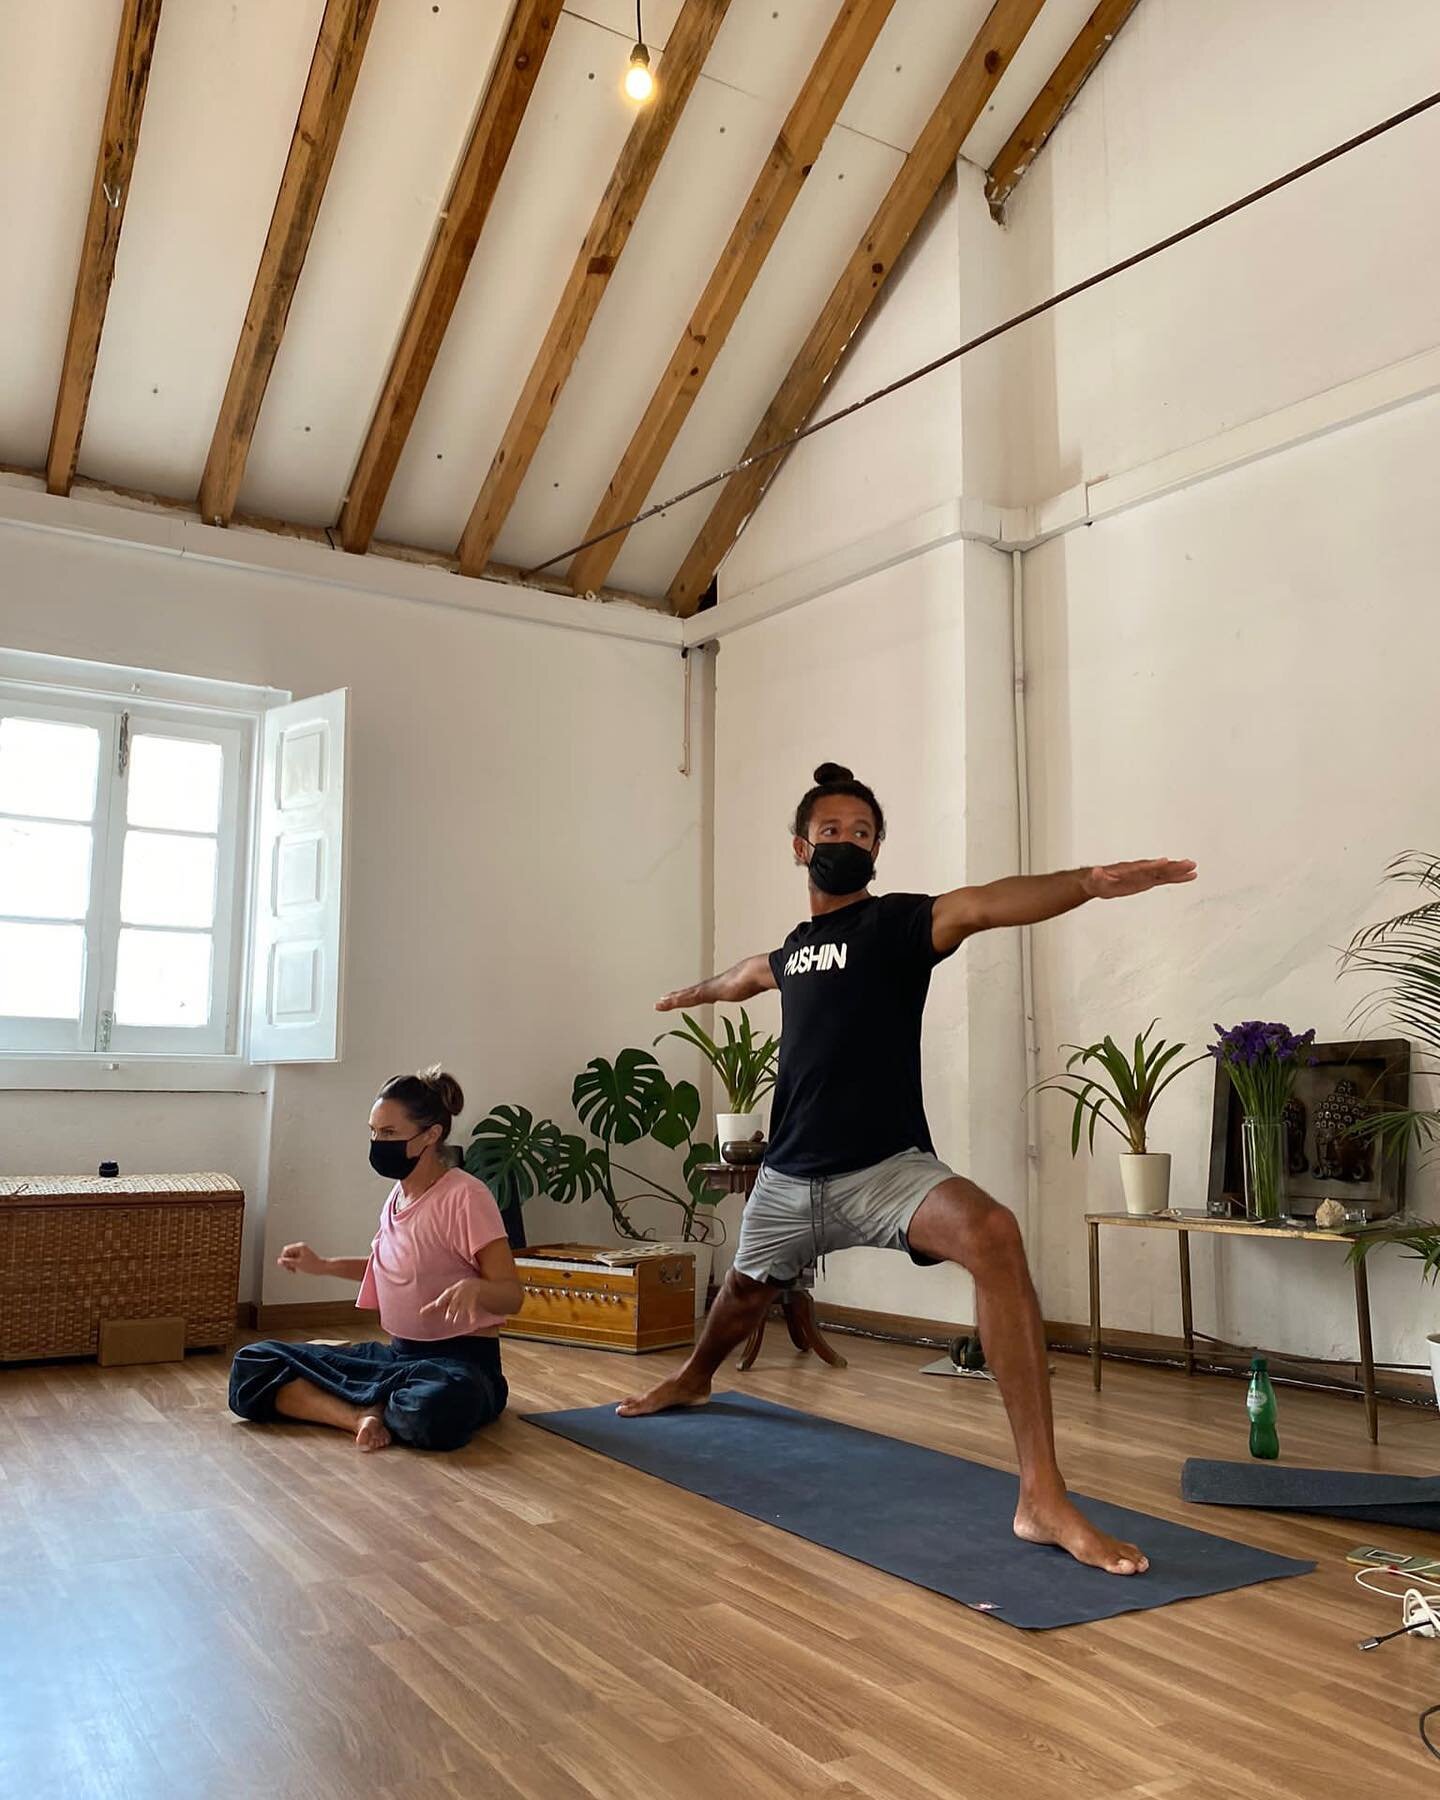 More asana labs! We worked really hard today and I&rsquo;m really proud of everyone&rsquo;s enthusiasm and effort. When an asana is done with effort and rigor, muscles engaged, aligned, and activated, one can really feel the true benefits! #yoga #yog